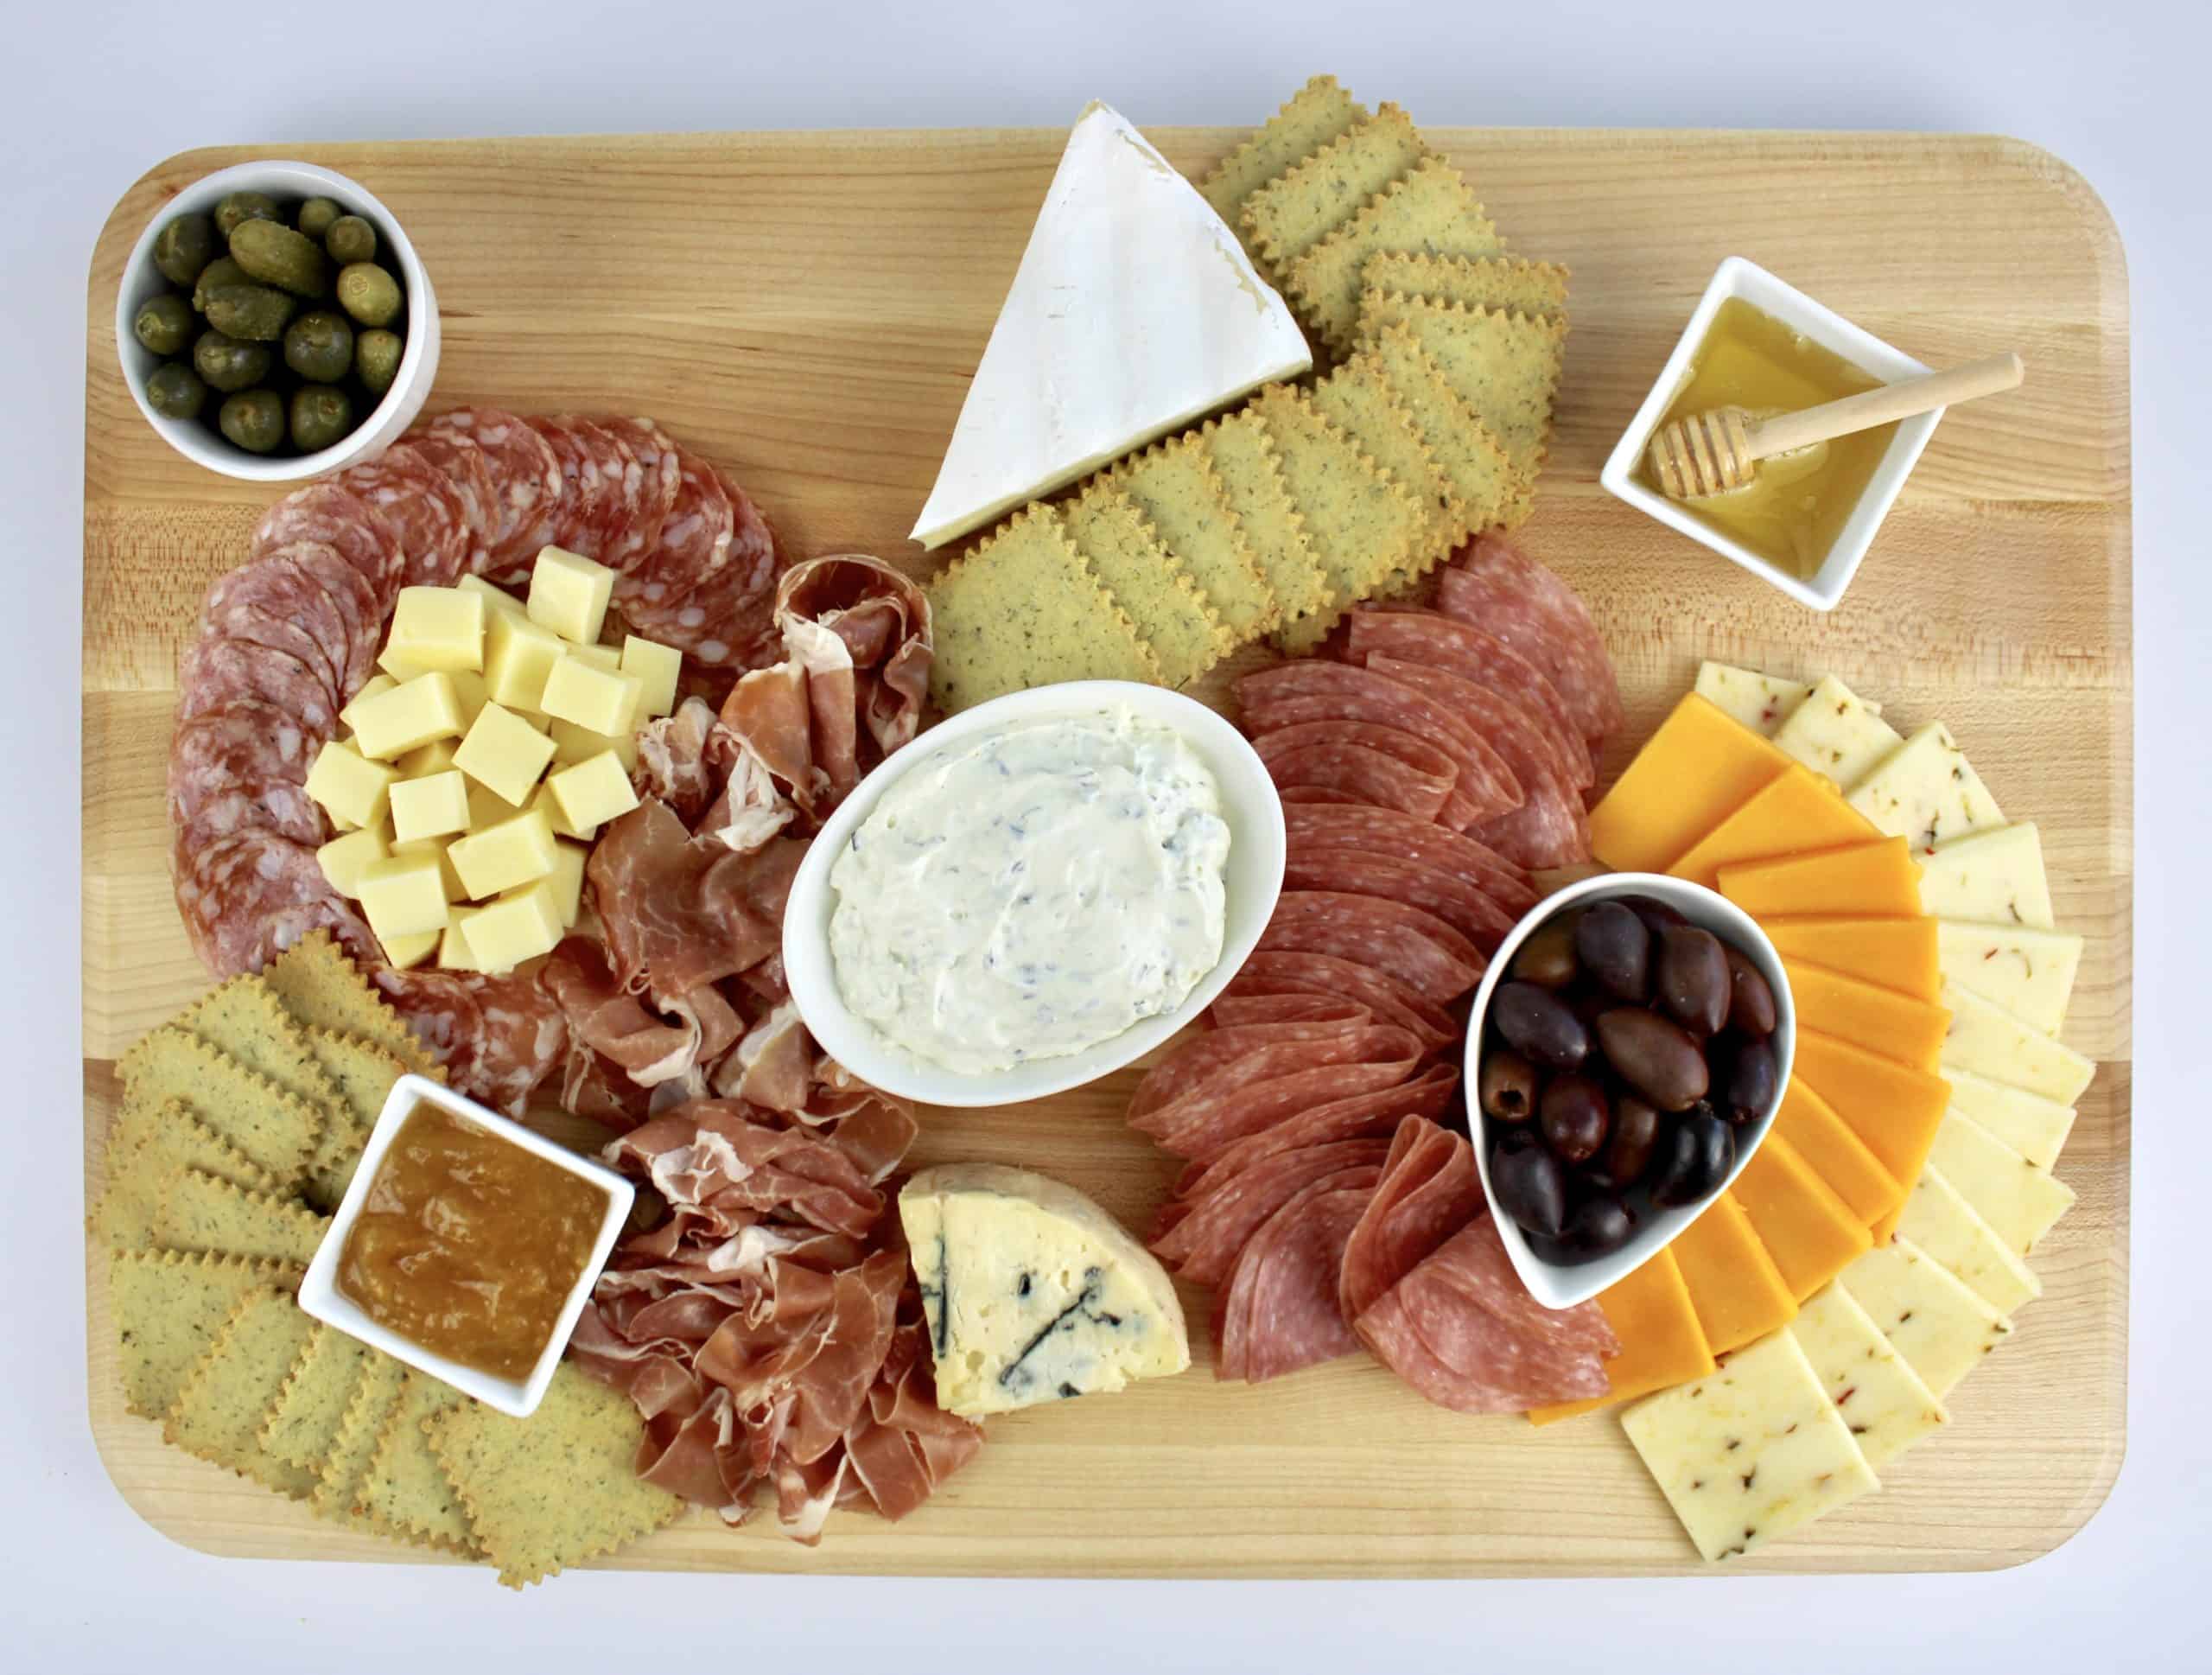 cheese board with meats cheeses and crackers